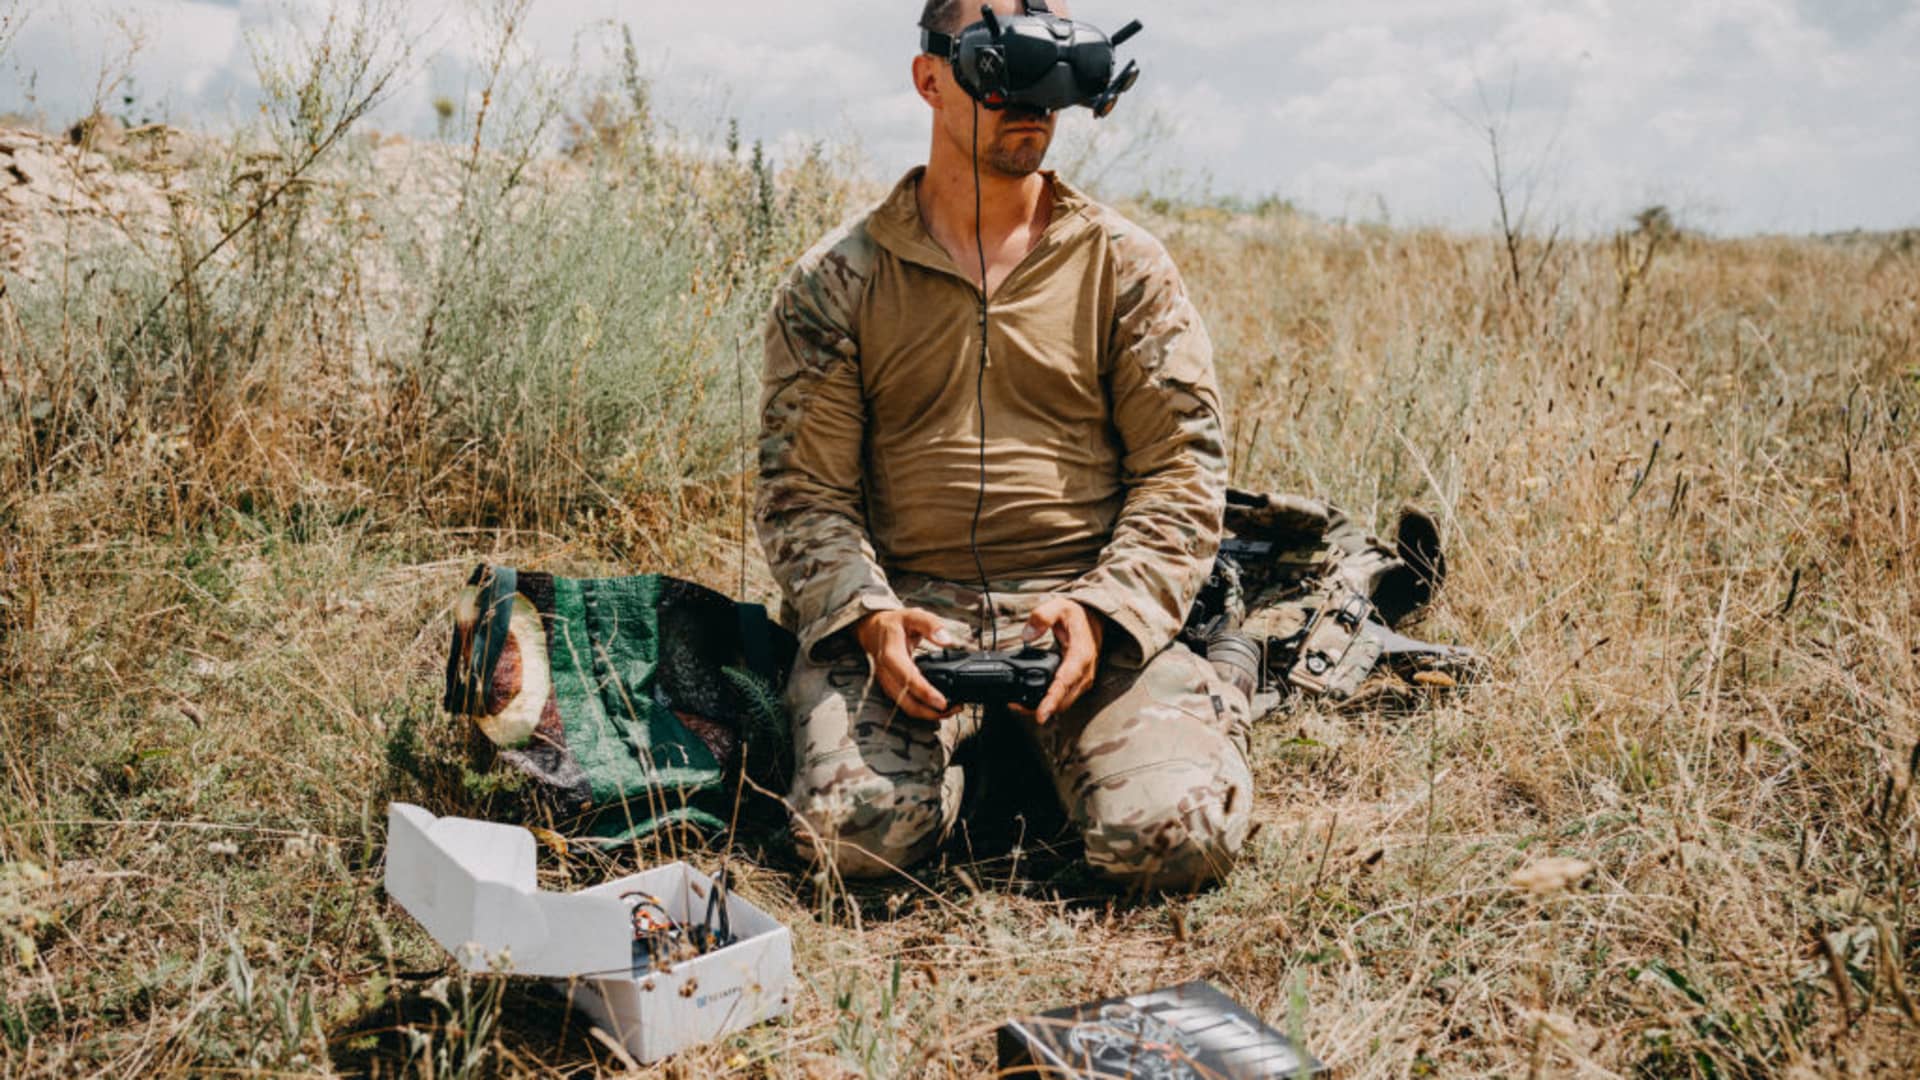 A Ukrainian soldier of the 24th Separate Mechanized Brigade, named after King Danylo, operates the test flight a new FPV drone in the training area as soldiers test their new military equipment as Russia-Ukraine war continues in Donetsk Oblast, Ukraine on August 03, 2023. 